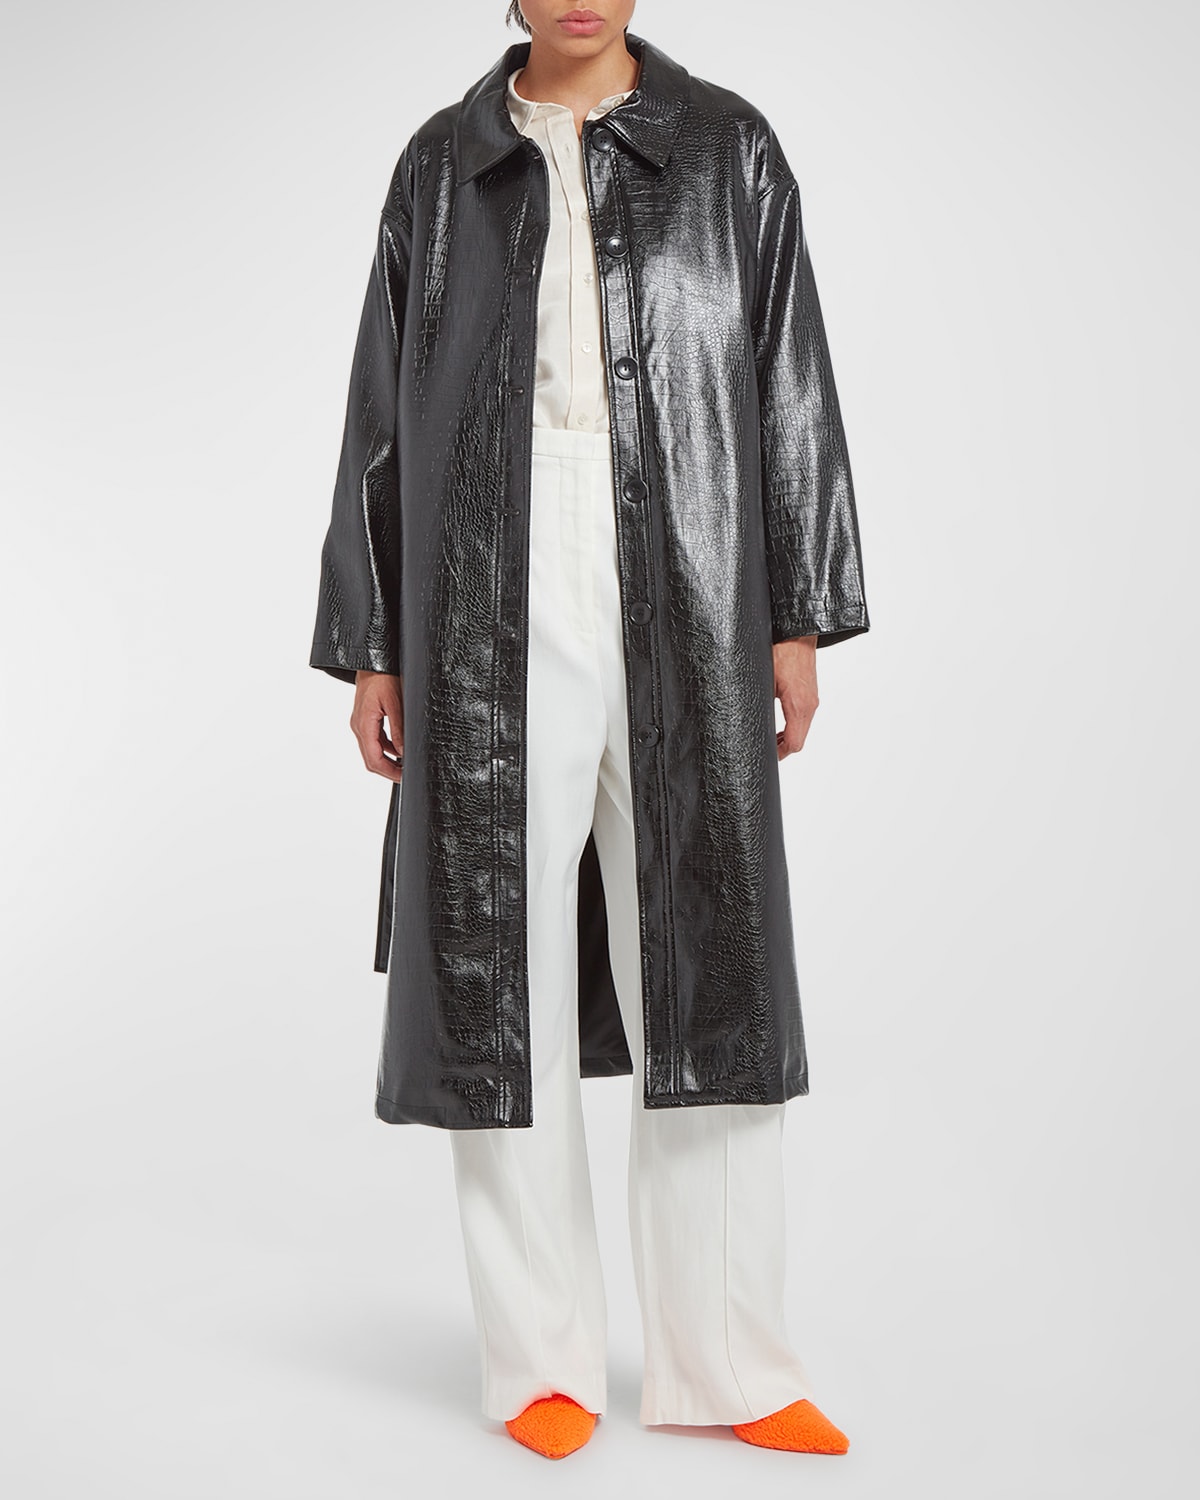 APPARIS NARA FAUX LEATHER BELTED TRENCH COAT